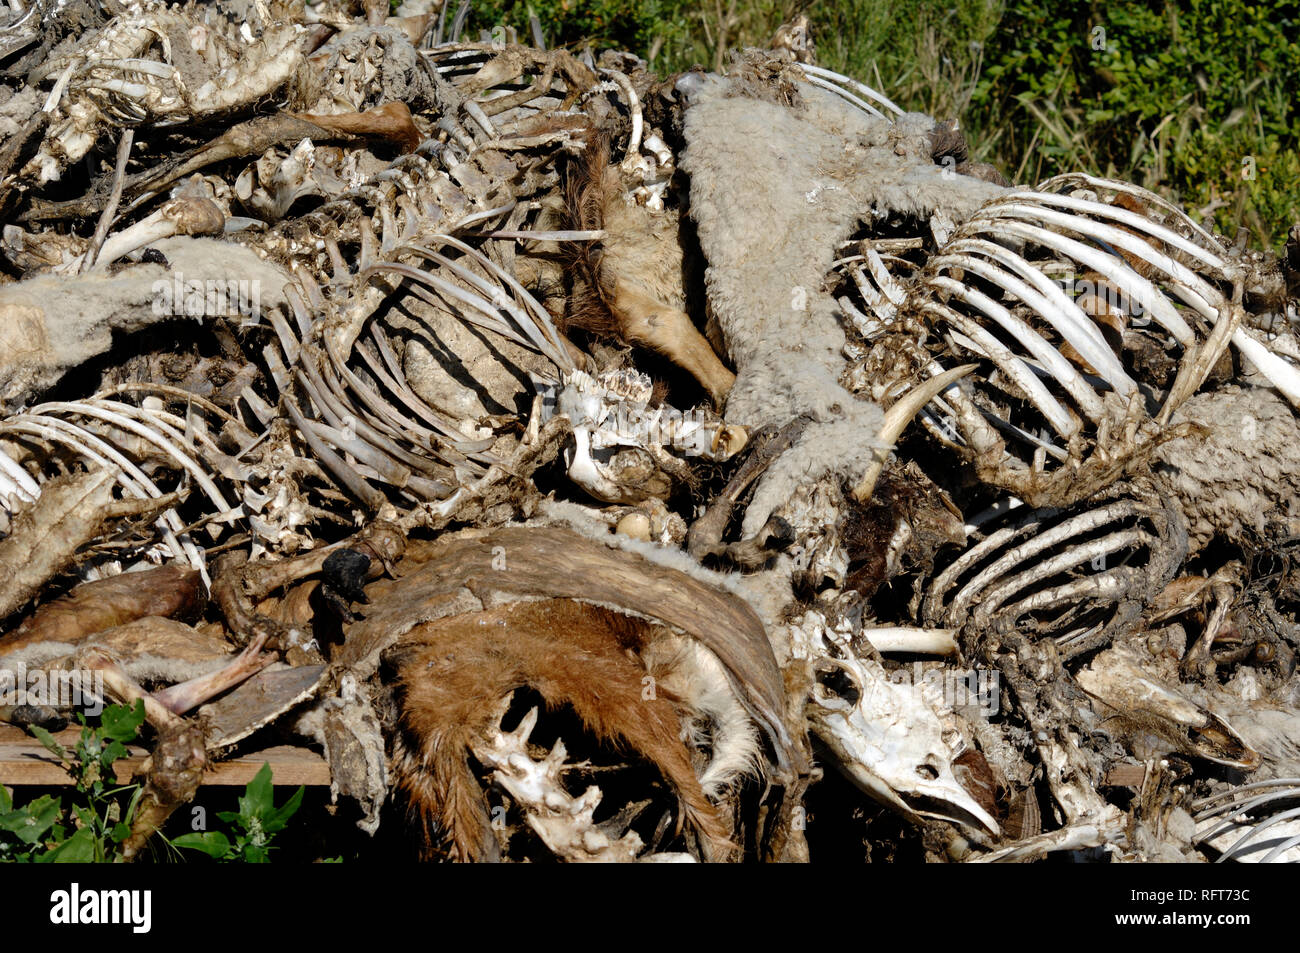 Pile of Sheep Carcases or Carcasses, Bones or Skeletons, Picked Clean by Vultures in the Verdon Gorge Regional Park Alpes-de-Haute-Provence France Stock Photo